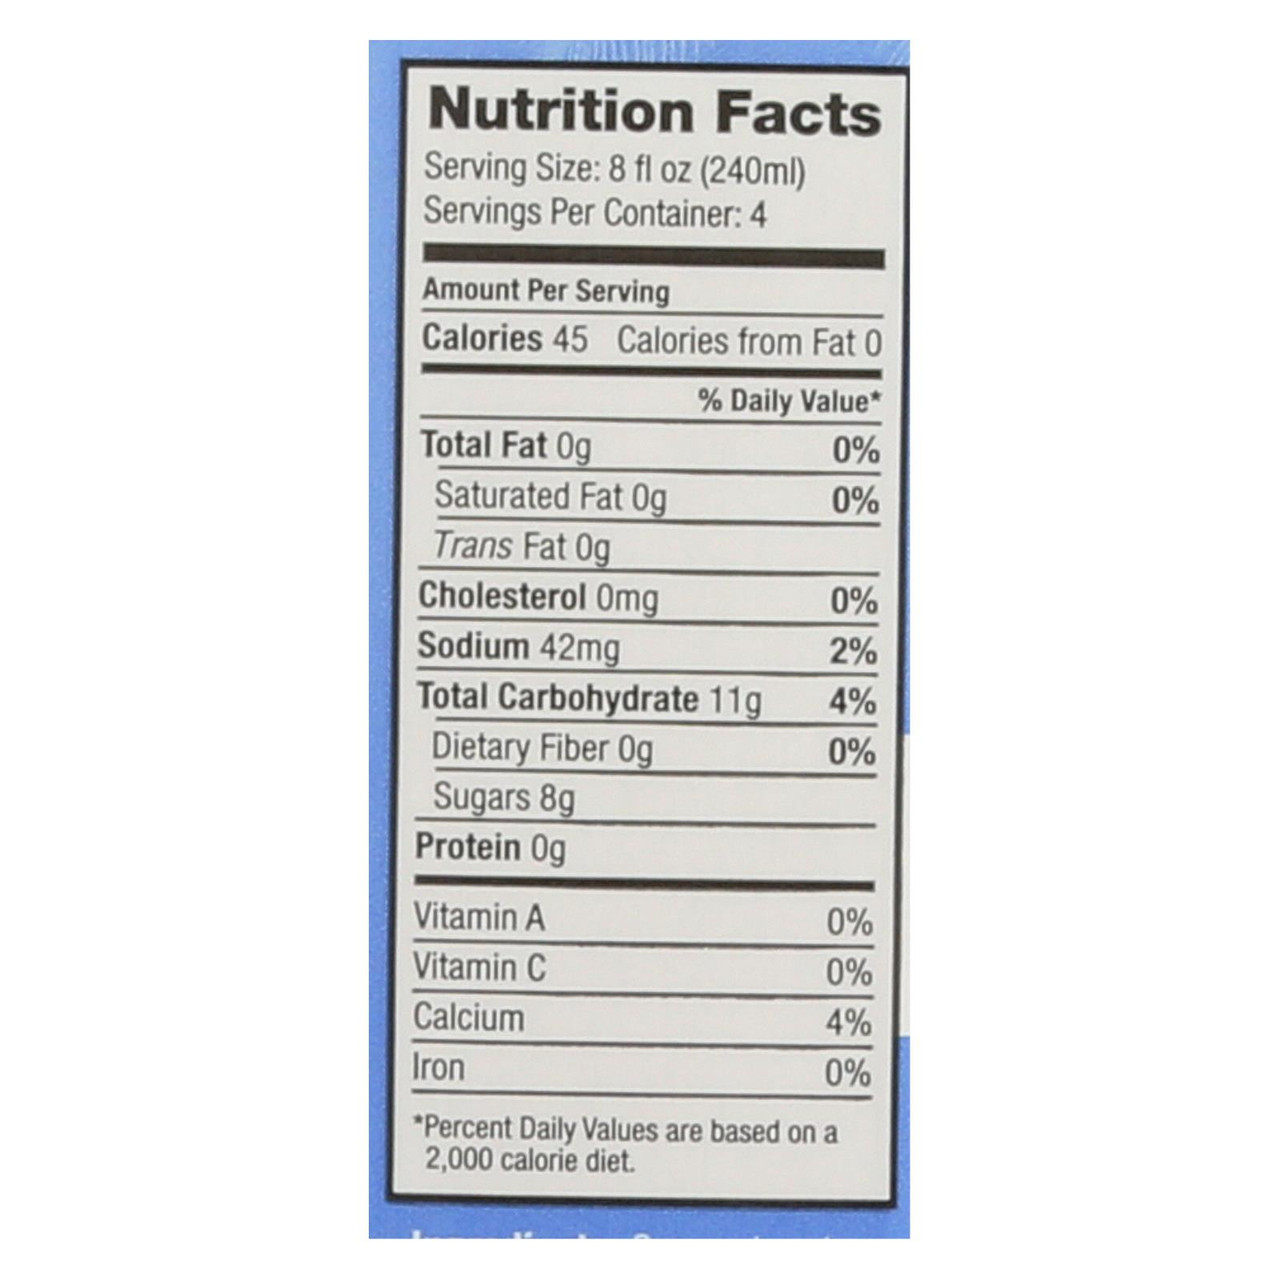 coconut water nutrition facts